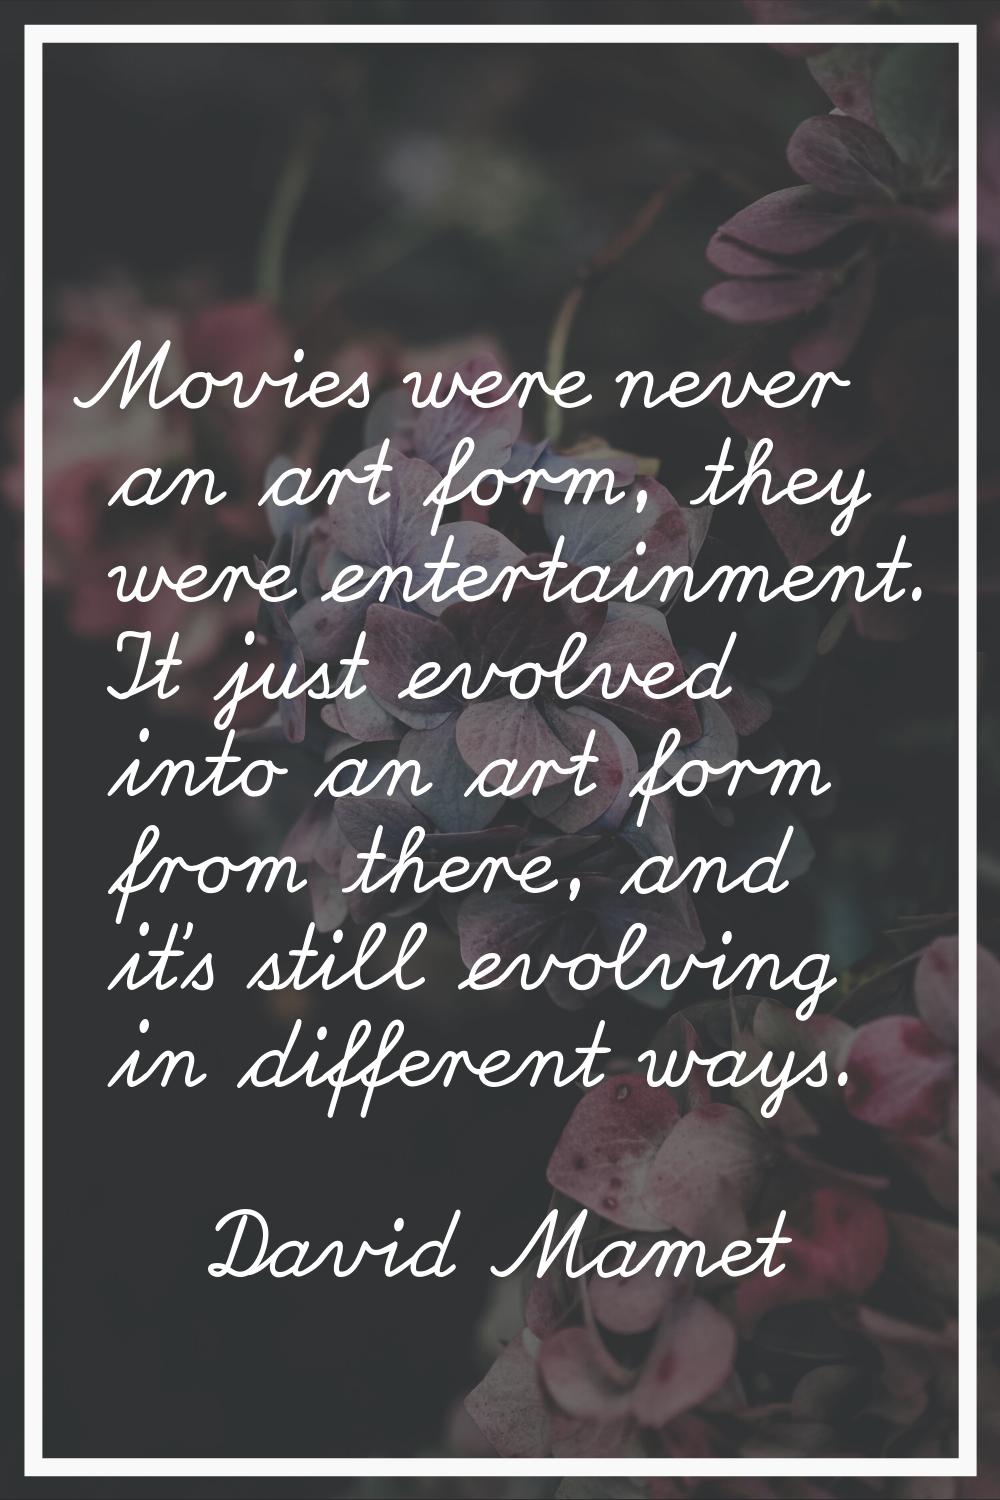 Movies were never an art form, they were entertainment. It just evolved into an art form from there